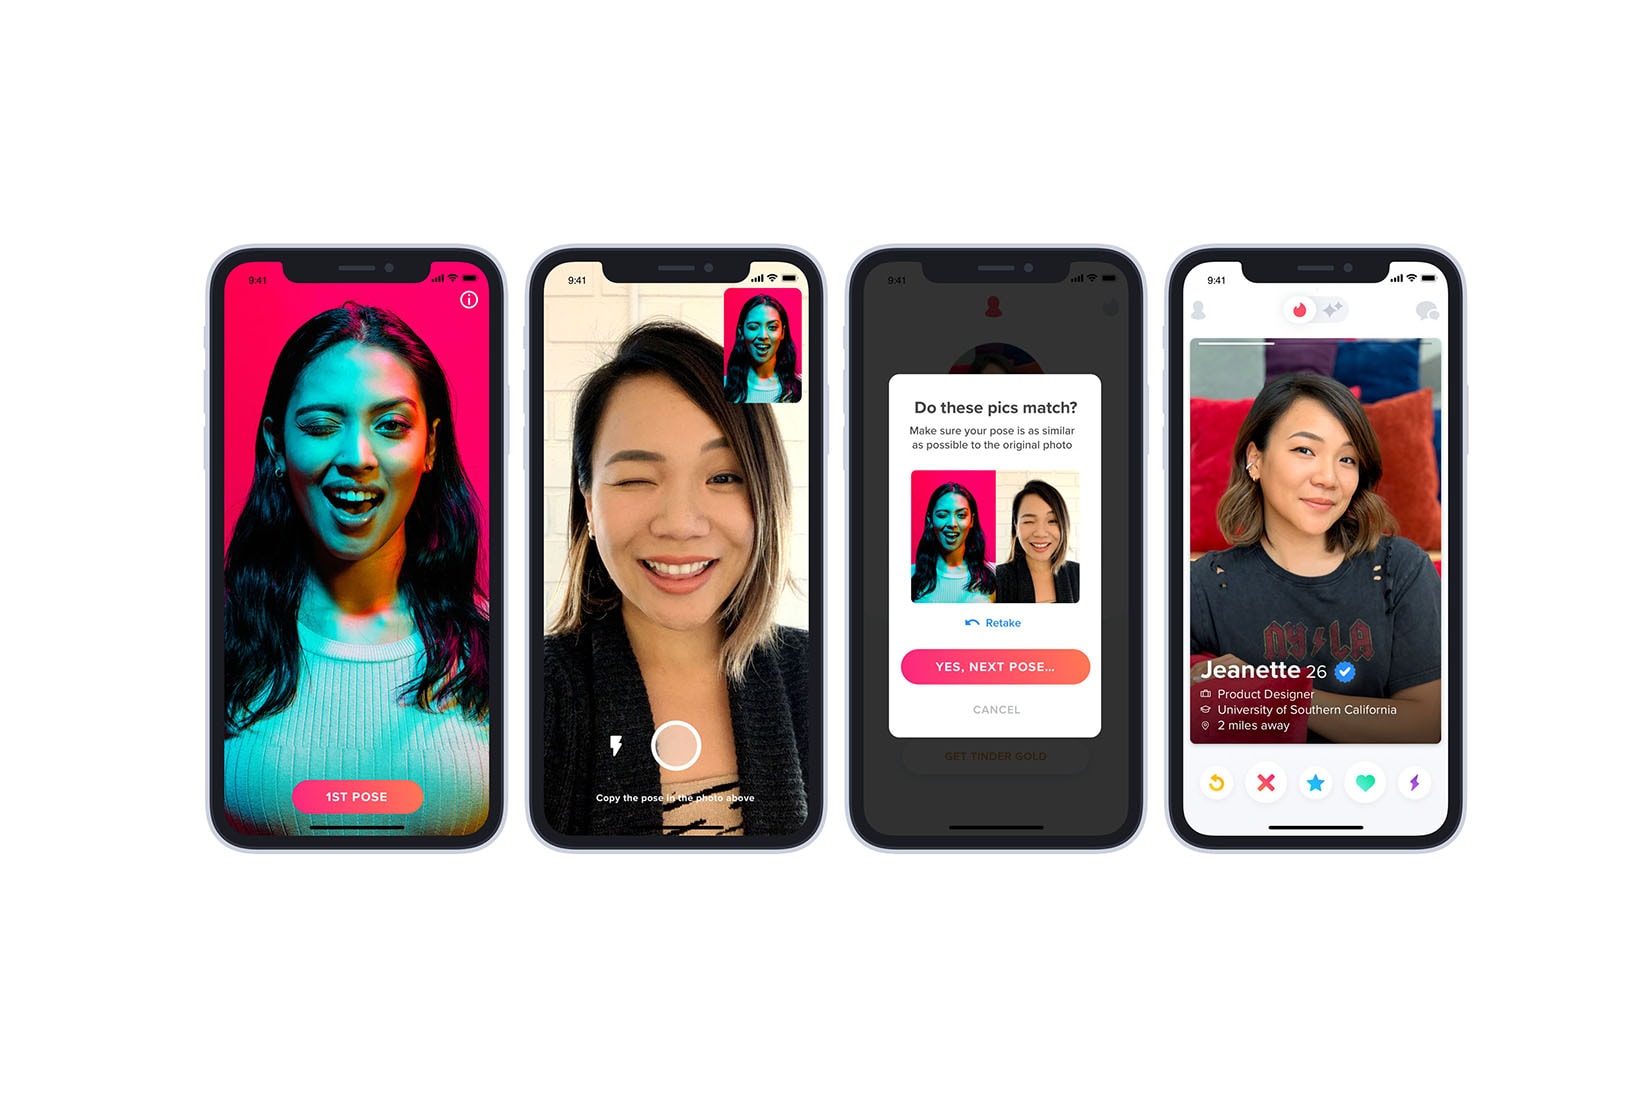 Tinder Safety Features 2020 Photo Verification